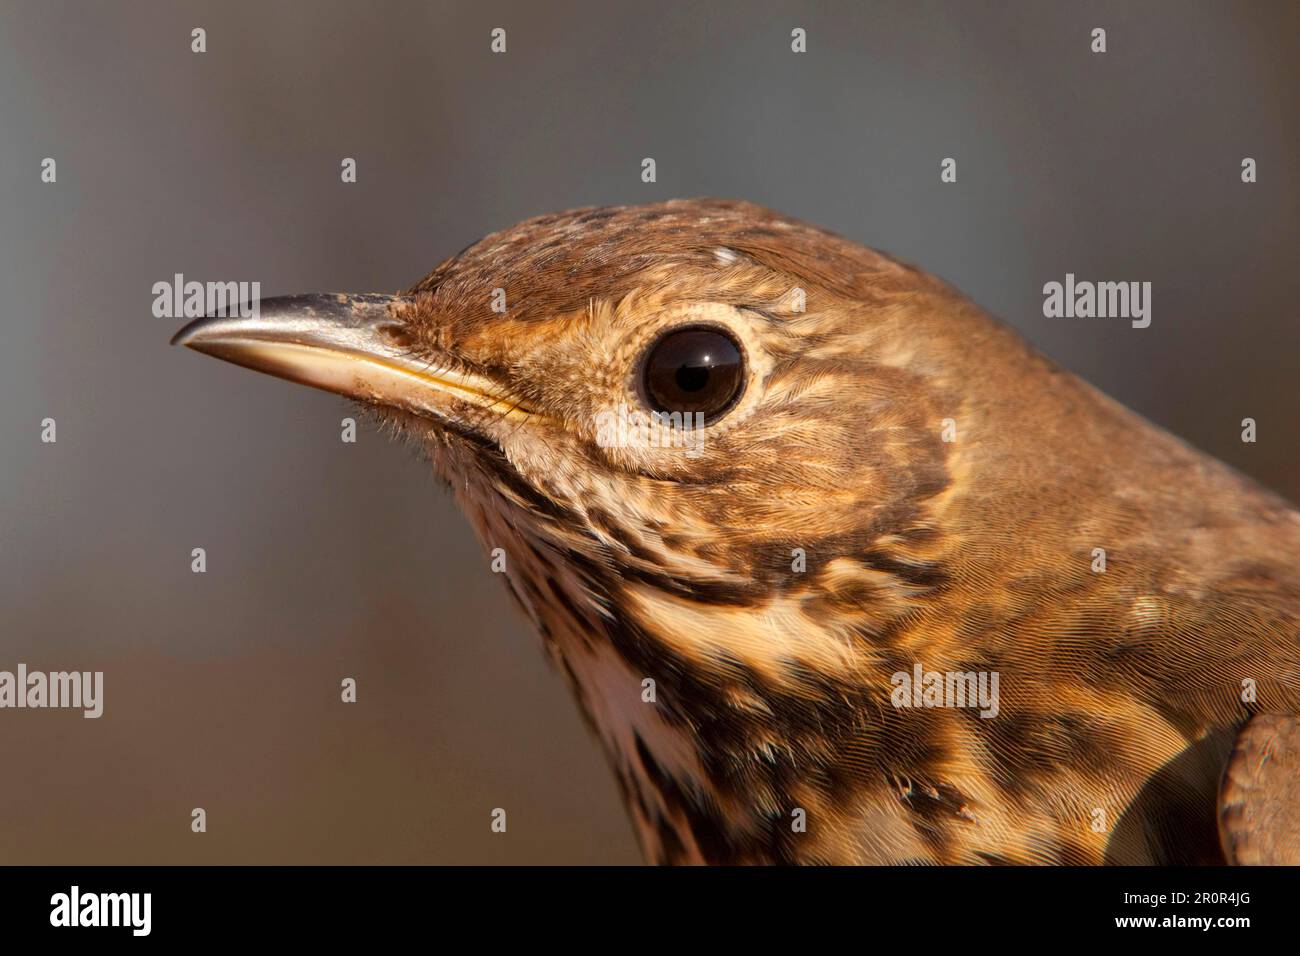 Song thrush (Turdus philomelos) adult, close-up of the head, England, winter Stock Photo